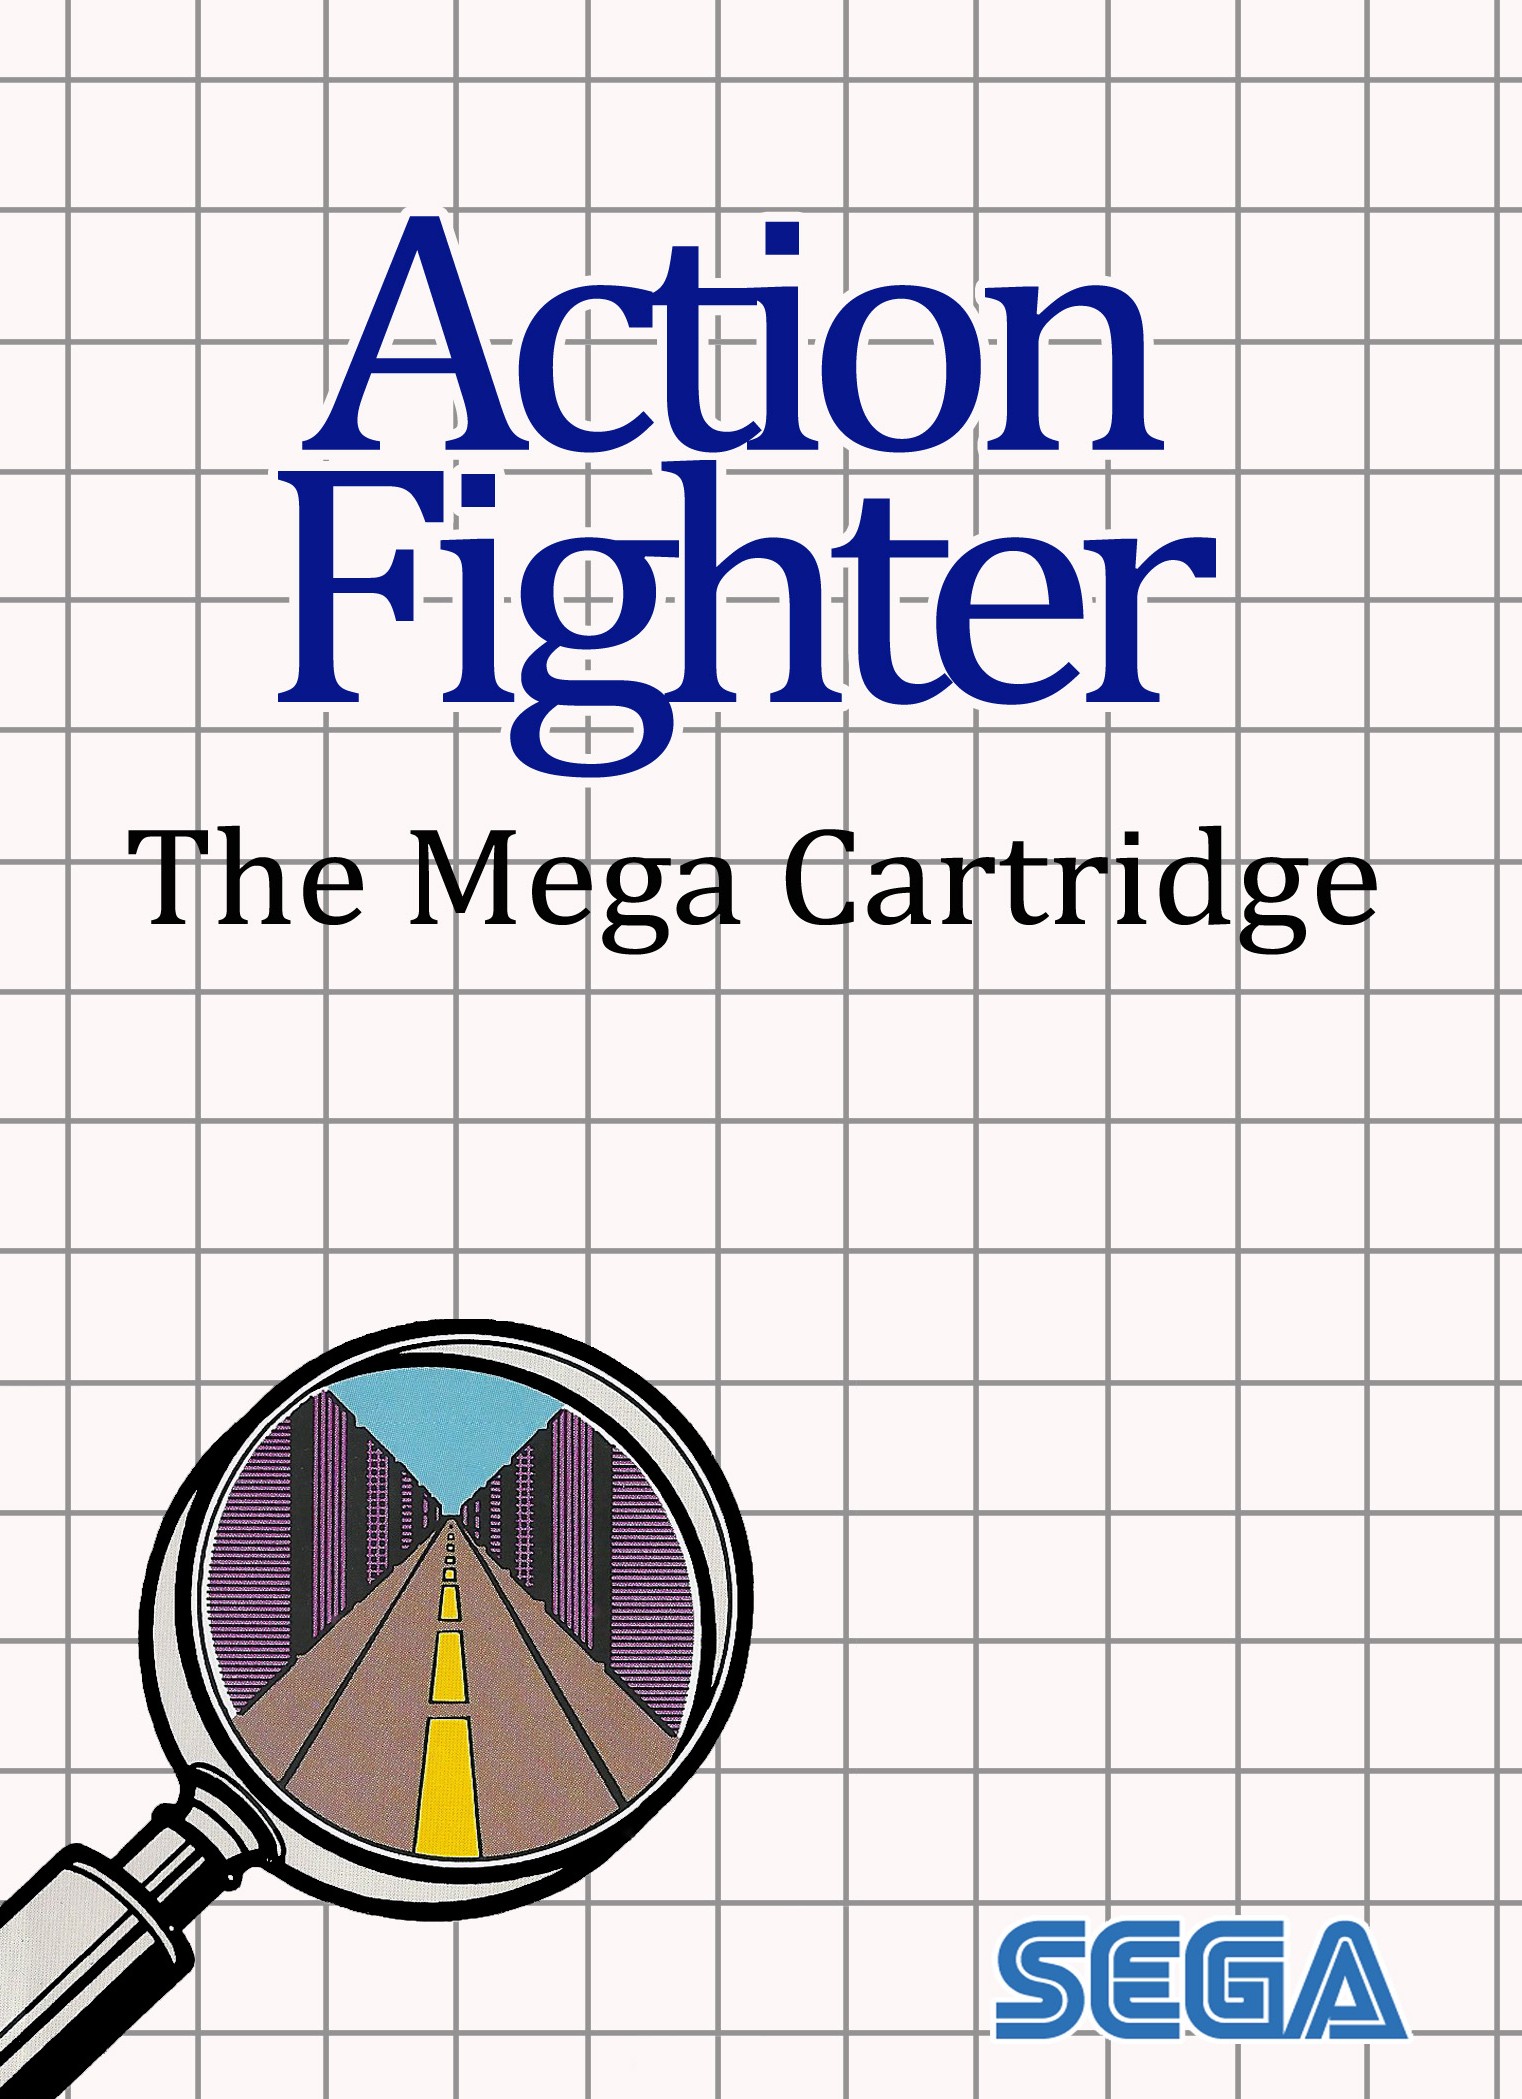 'Action Fighter'